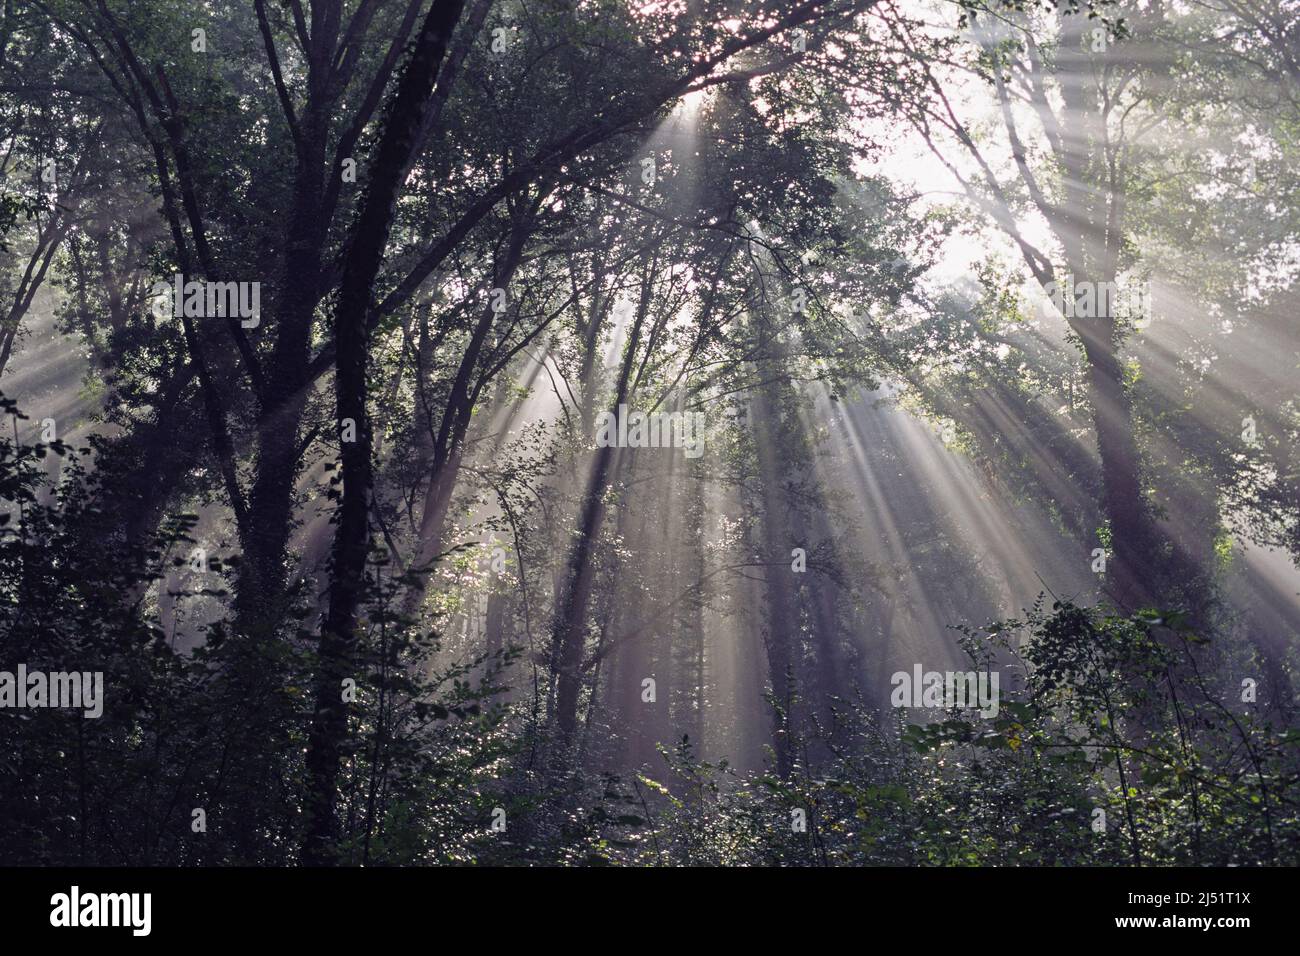 rays of light filter through the haze in a wood Stock Photo